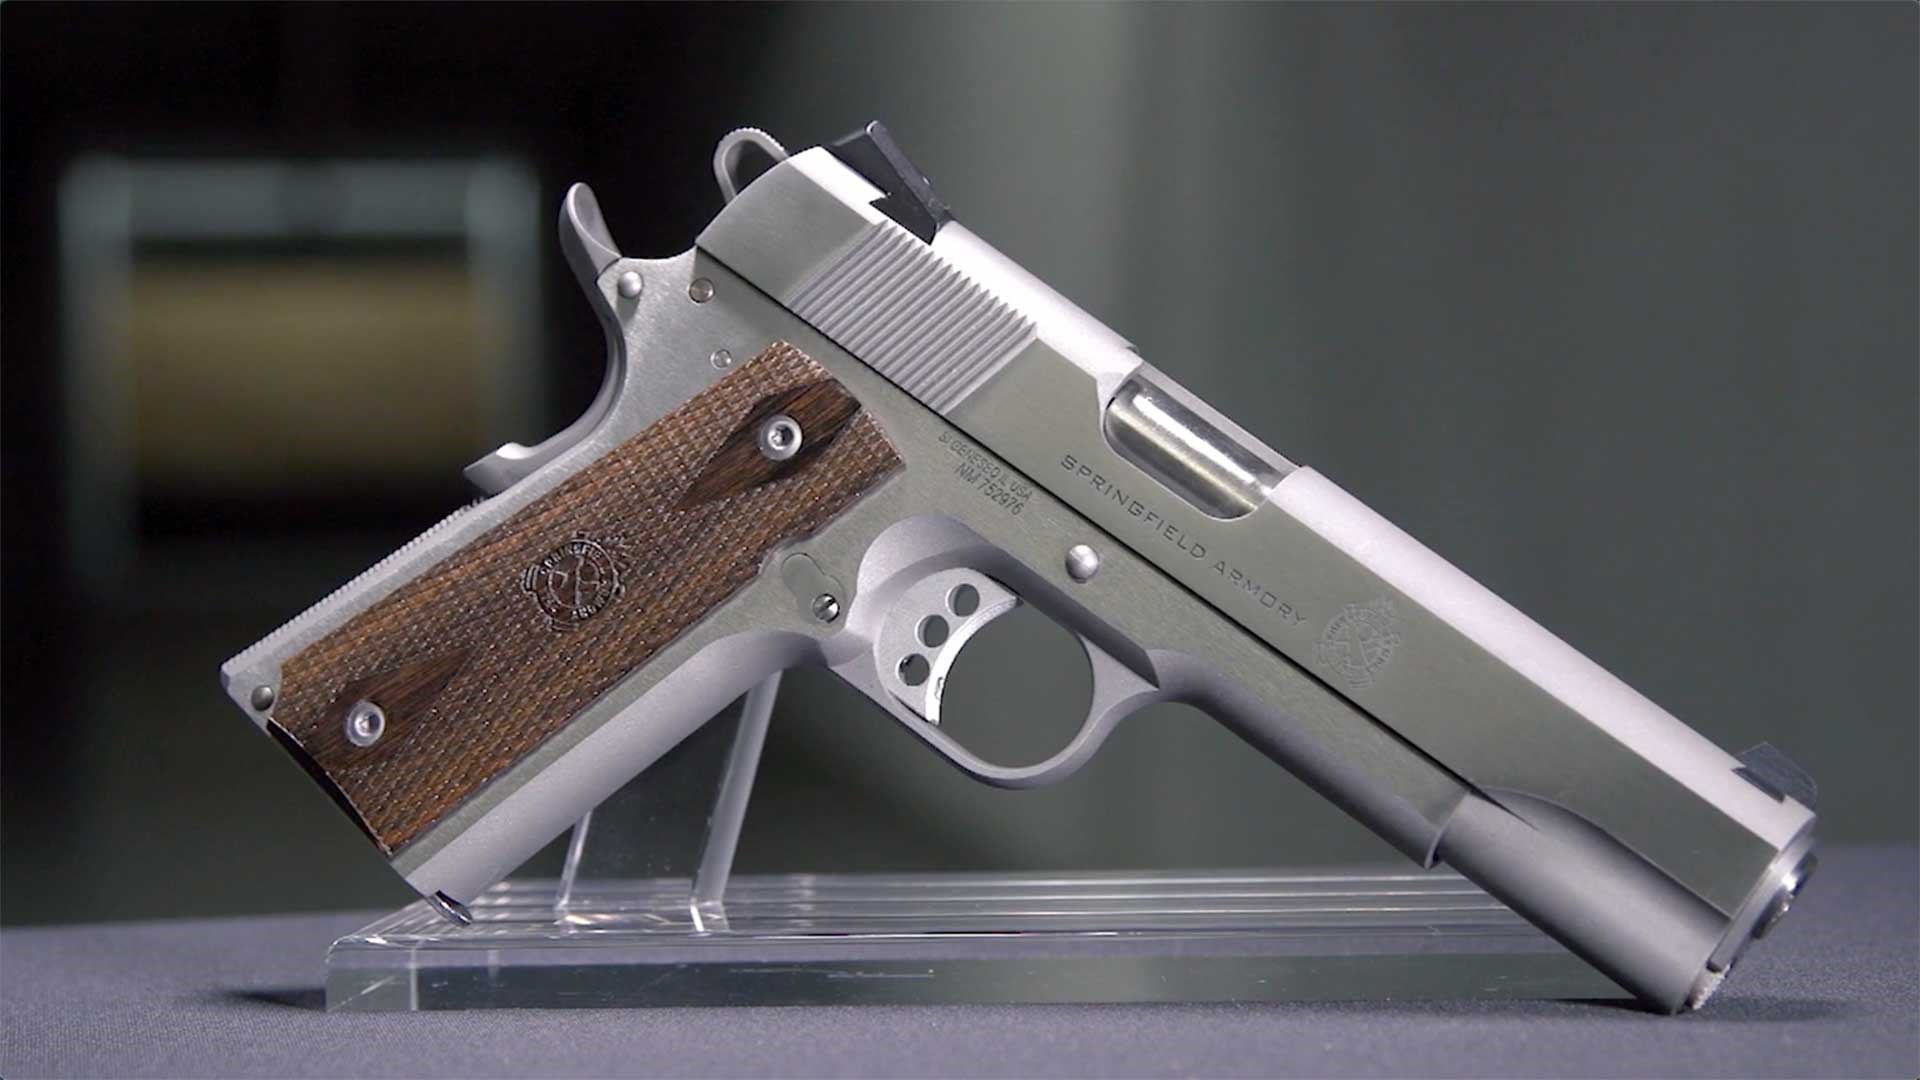 Right side of the stainless-steel Springfield Armory Garrison 1911 chambered in 9mm Luger.